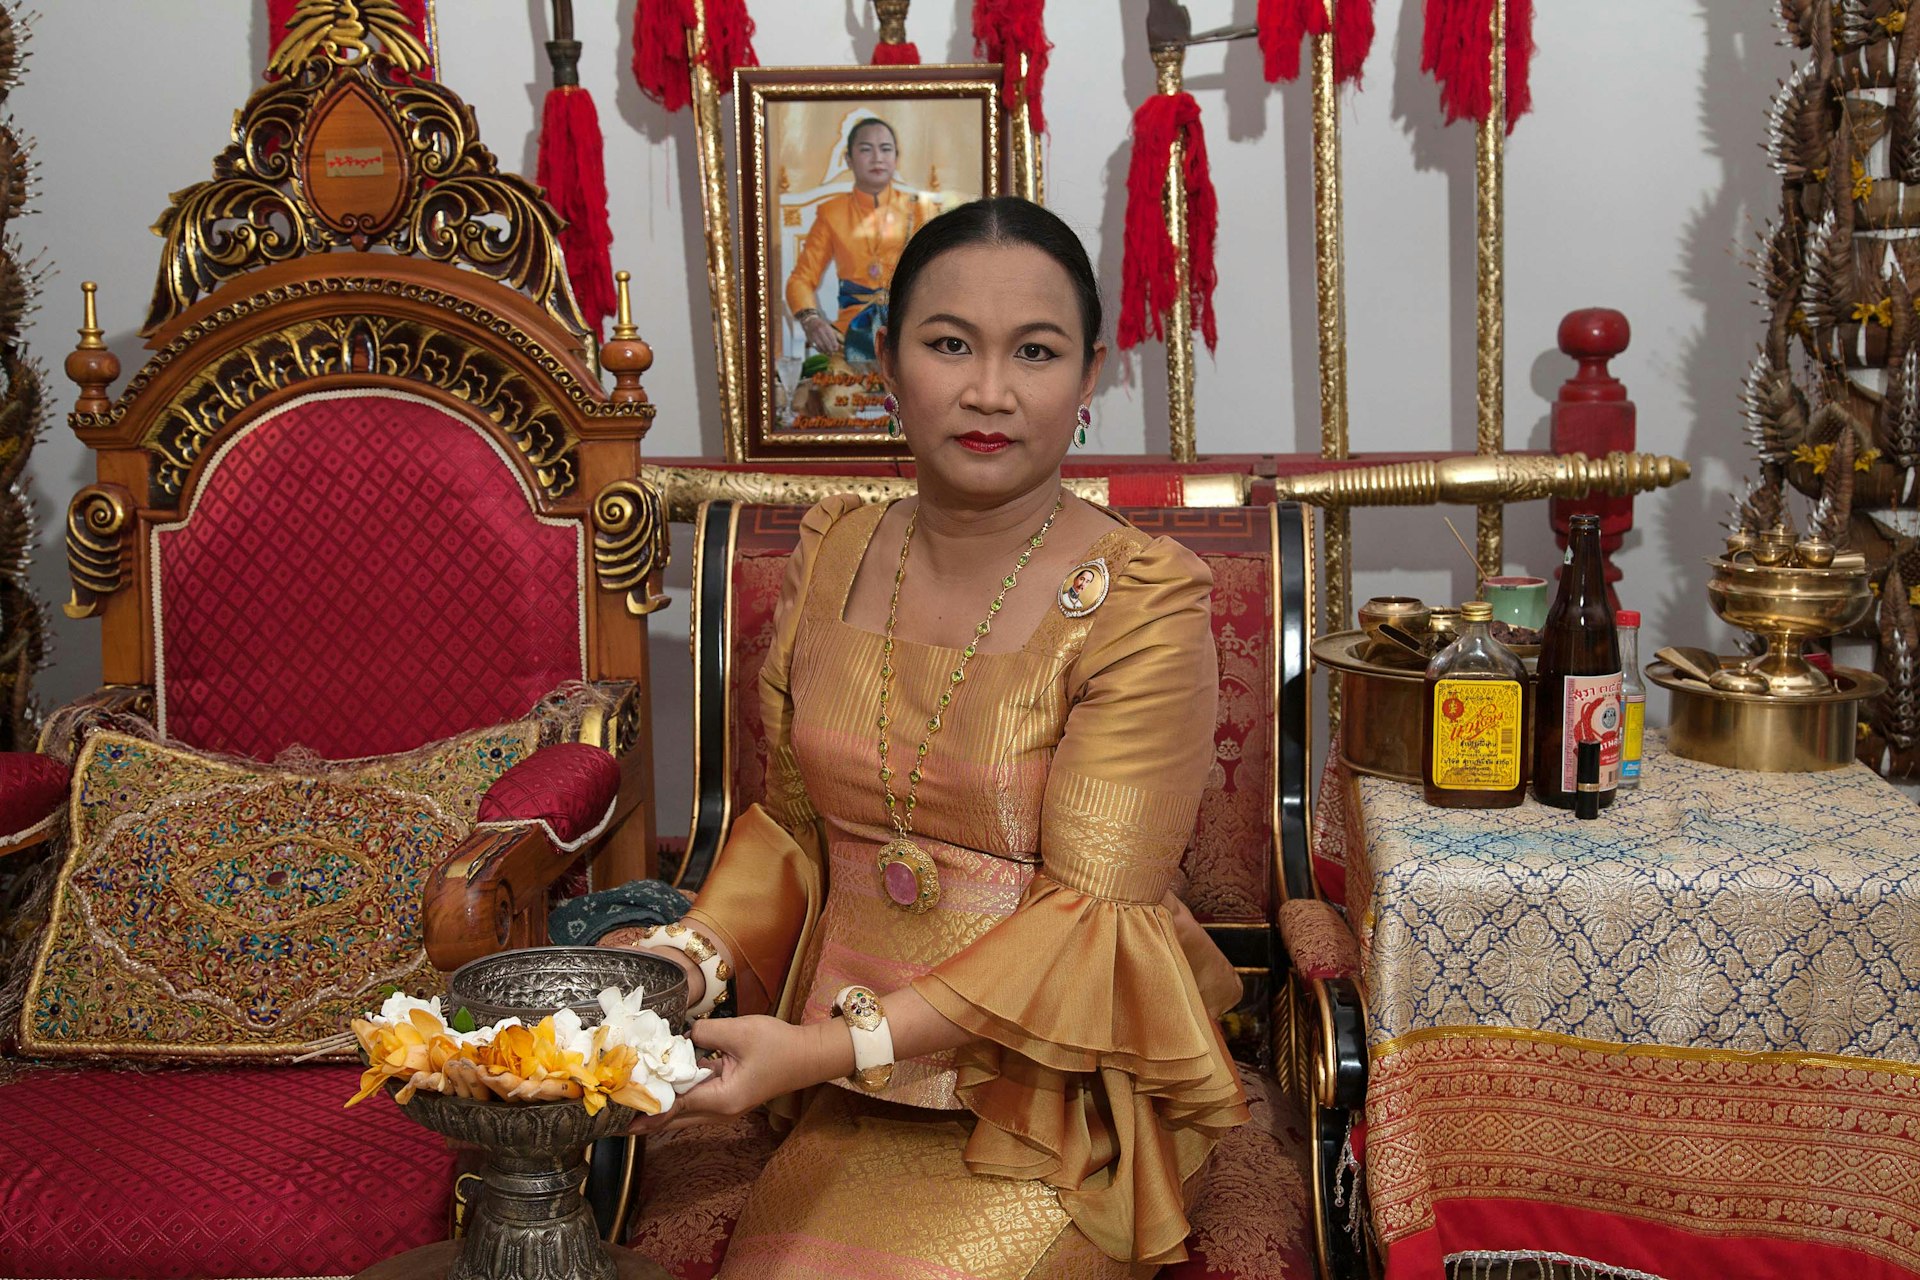 Prem, a transgender woman, who may be possessed by seven different spirits, is one of the most respected maa khii (spirit mediums) in Thailand. People come to see her for spiritual counseling, healing, or good fortune through the intercession of the spirits that possess her.